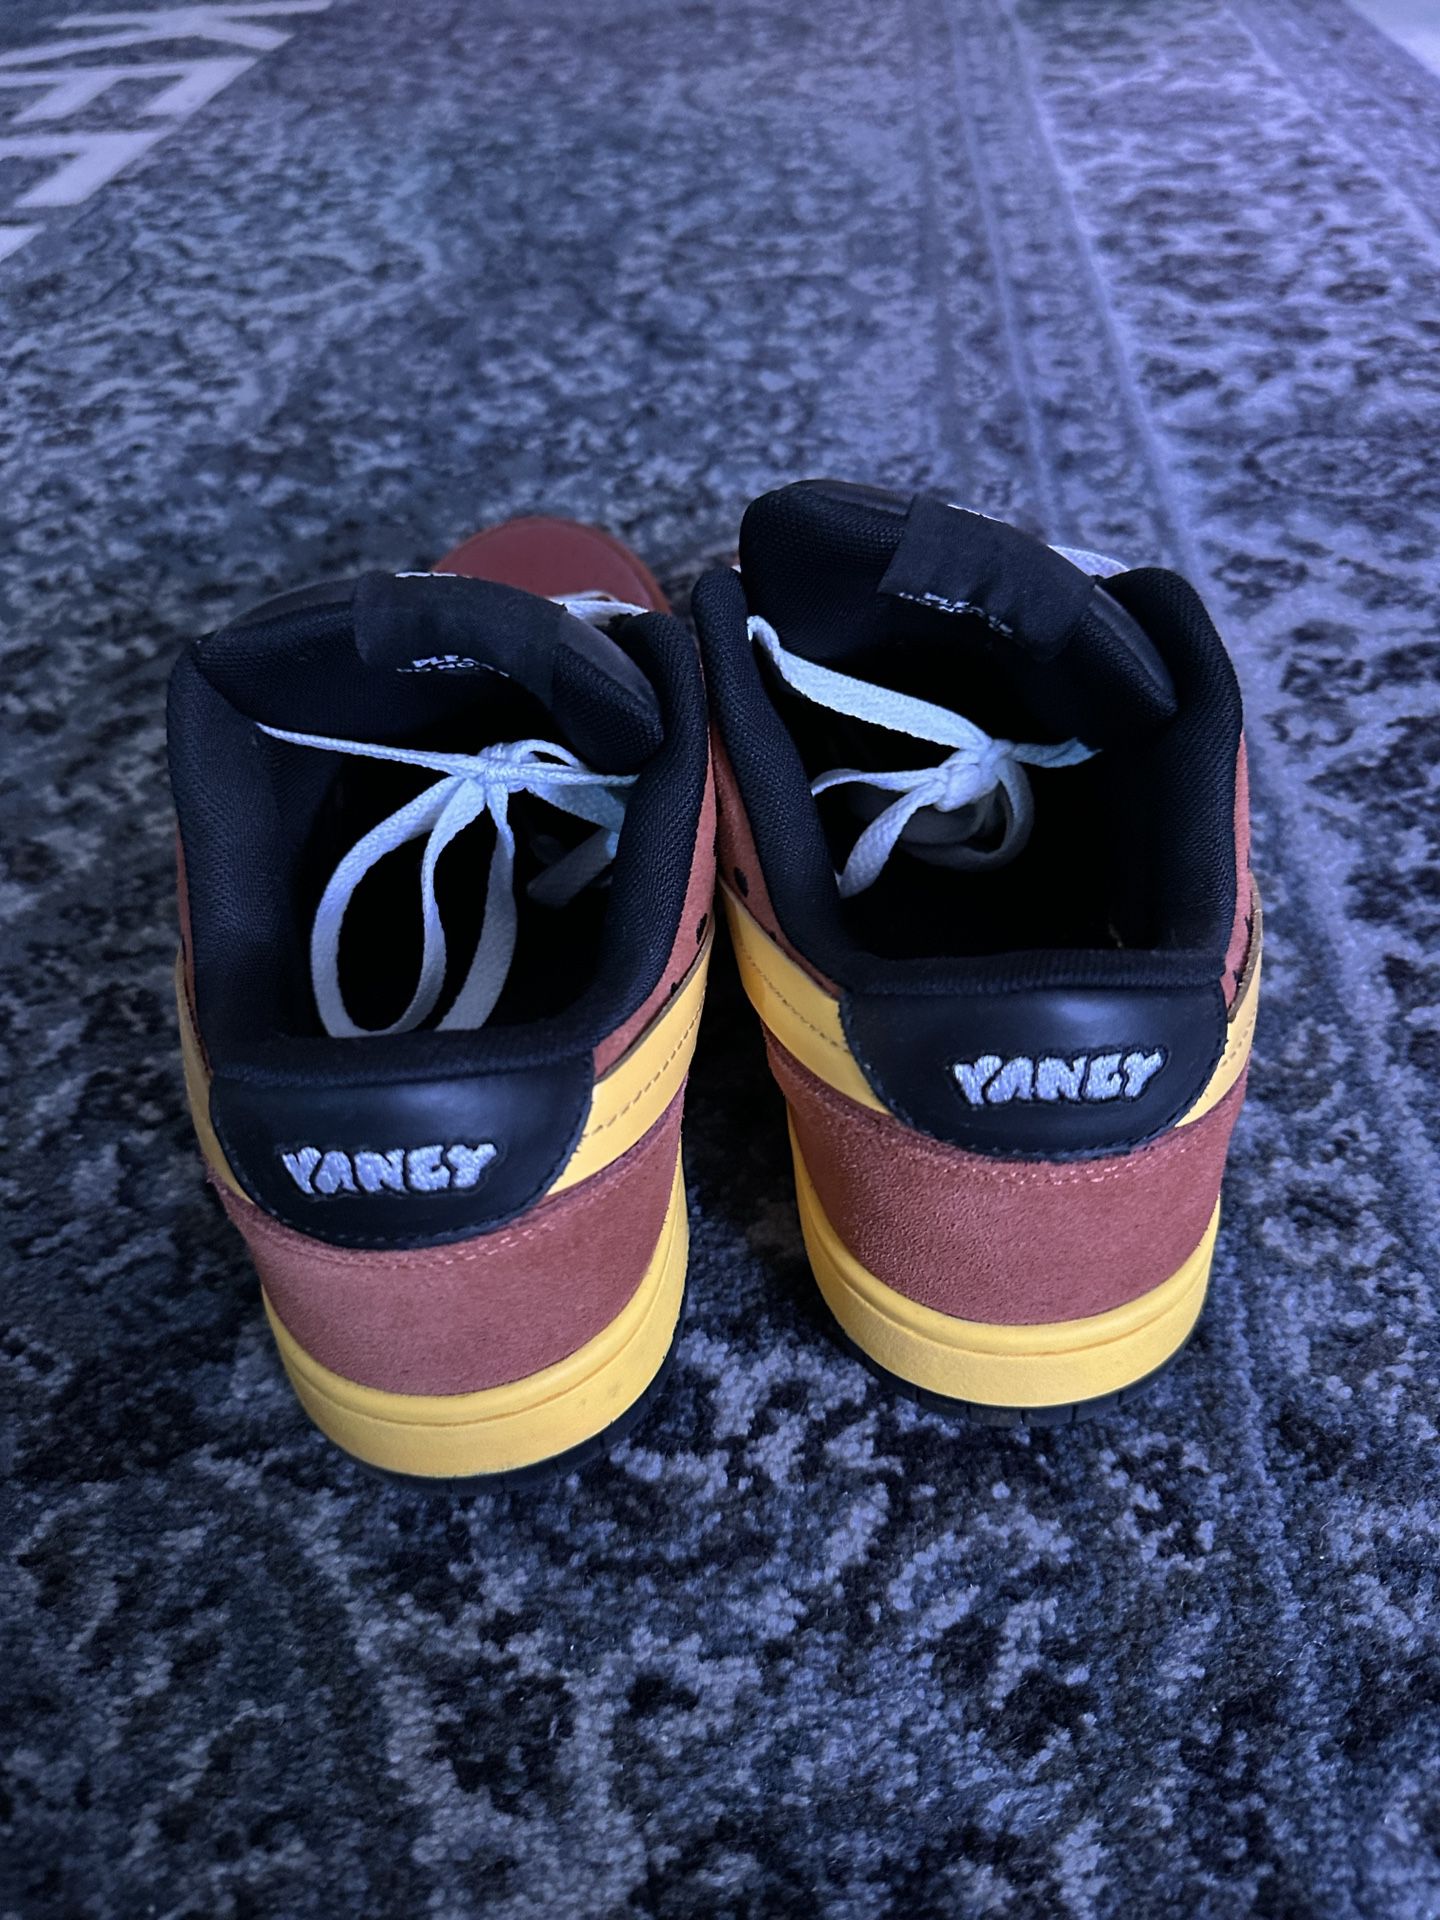 QC) 388¥ Vandy the pink Burger Dunks from 35 Minority (pls tell me